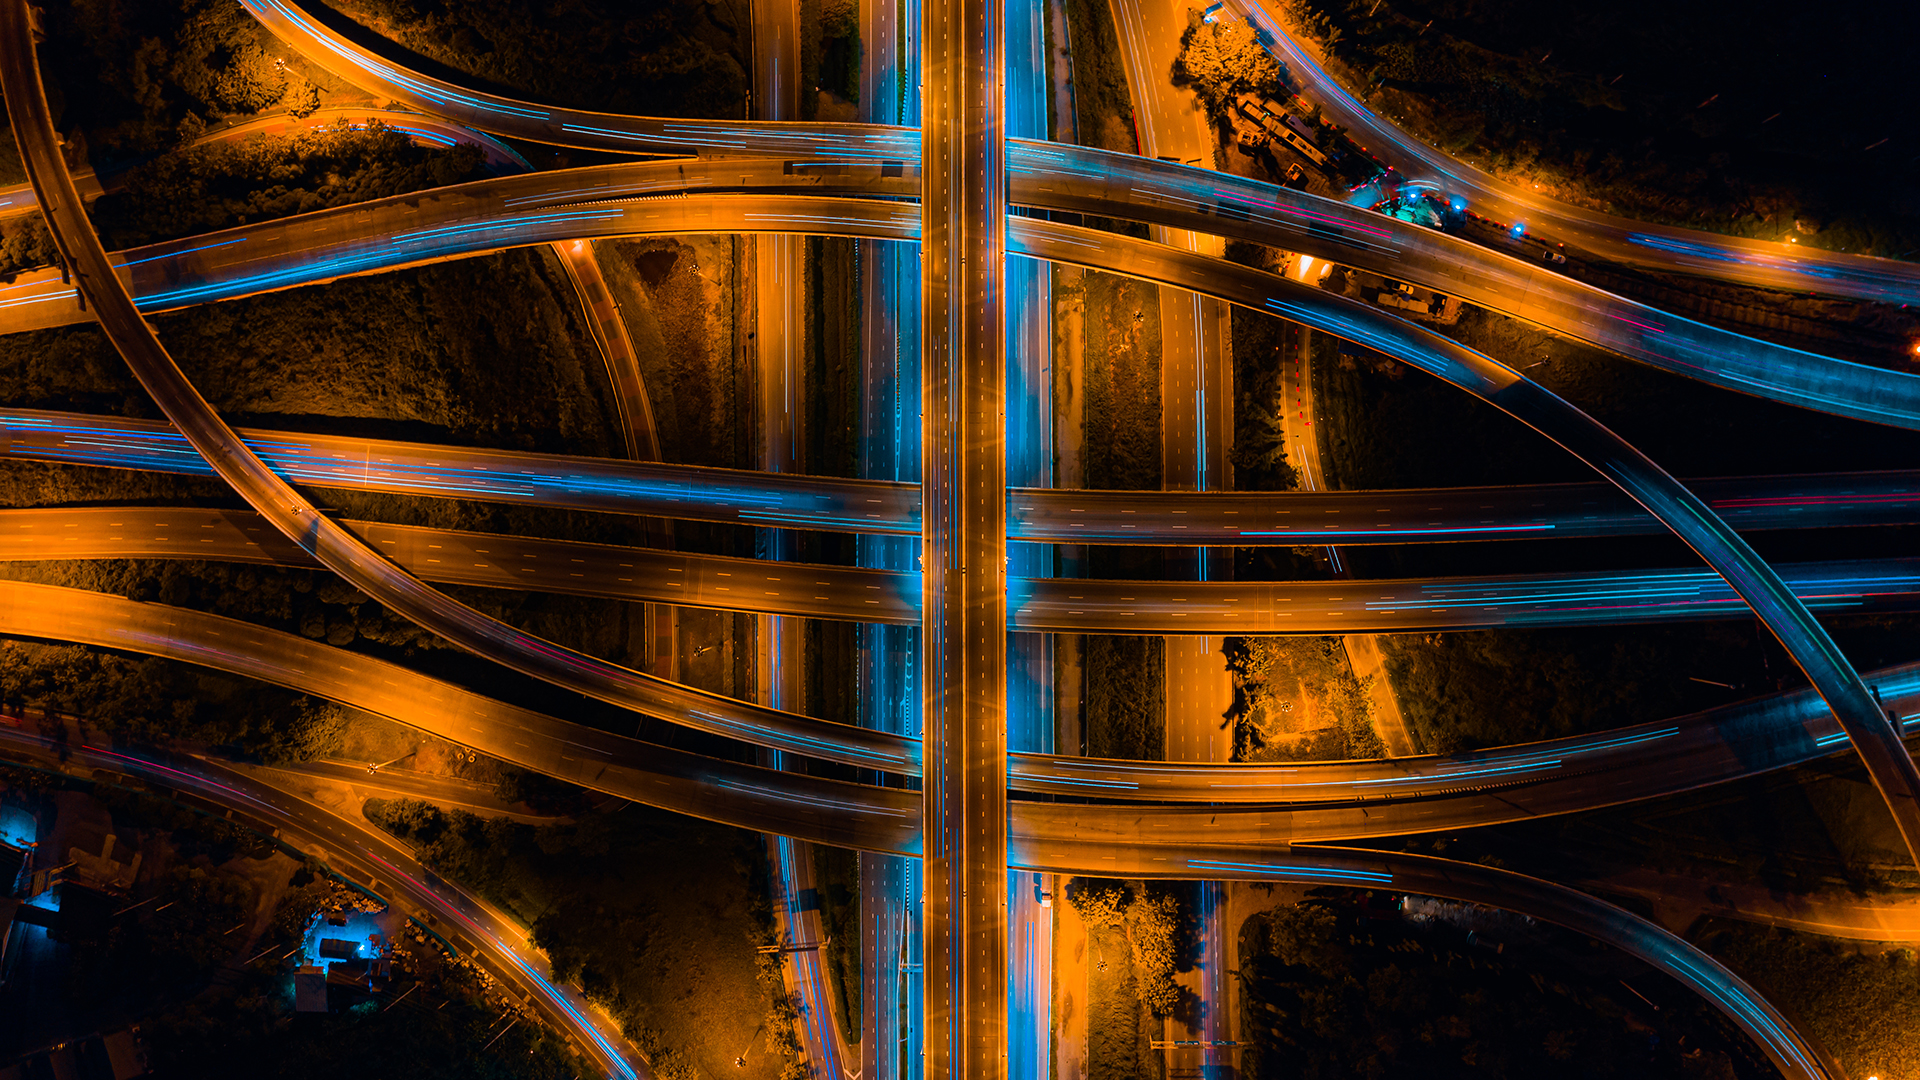 Interconnected highways and night